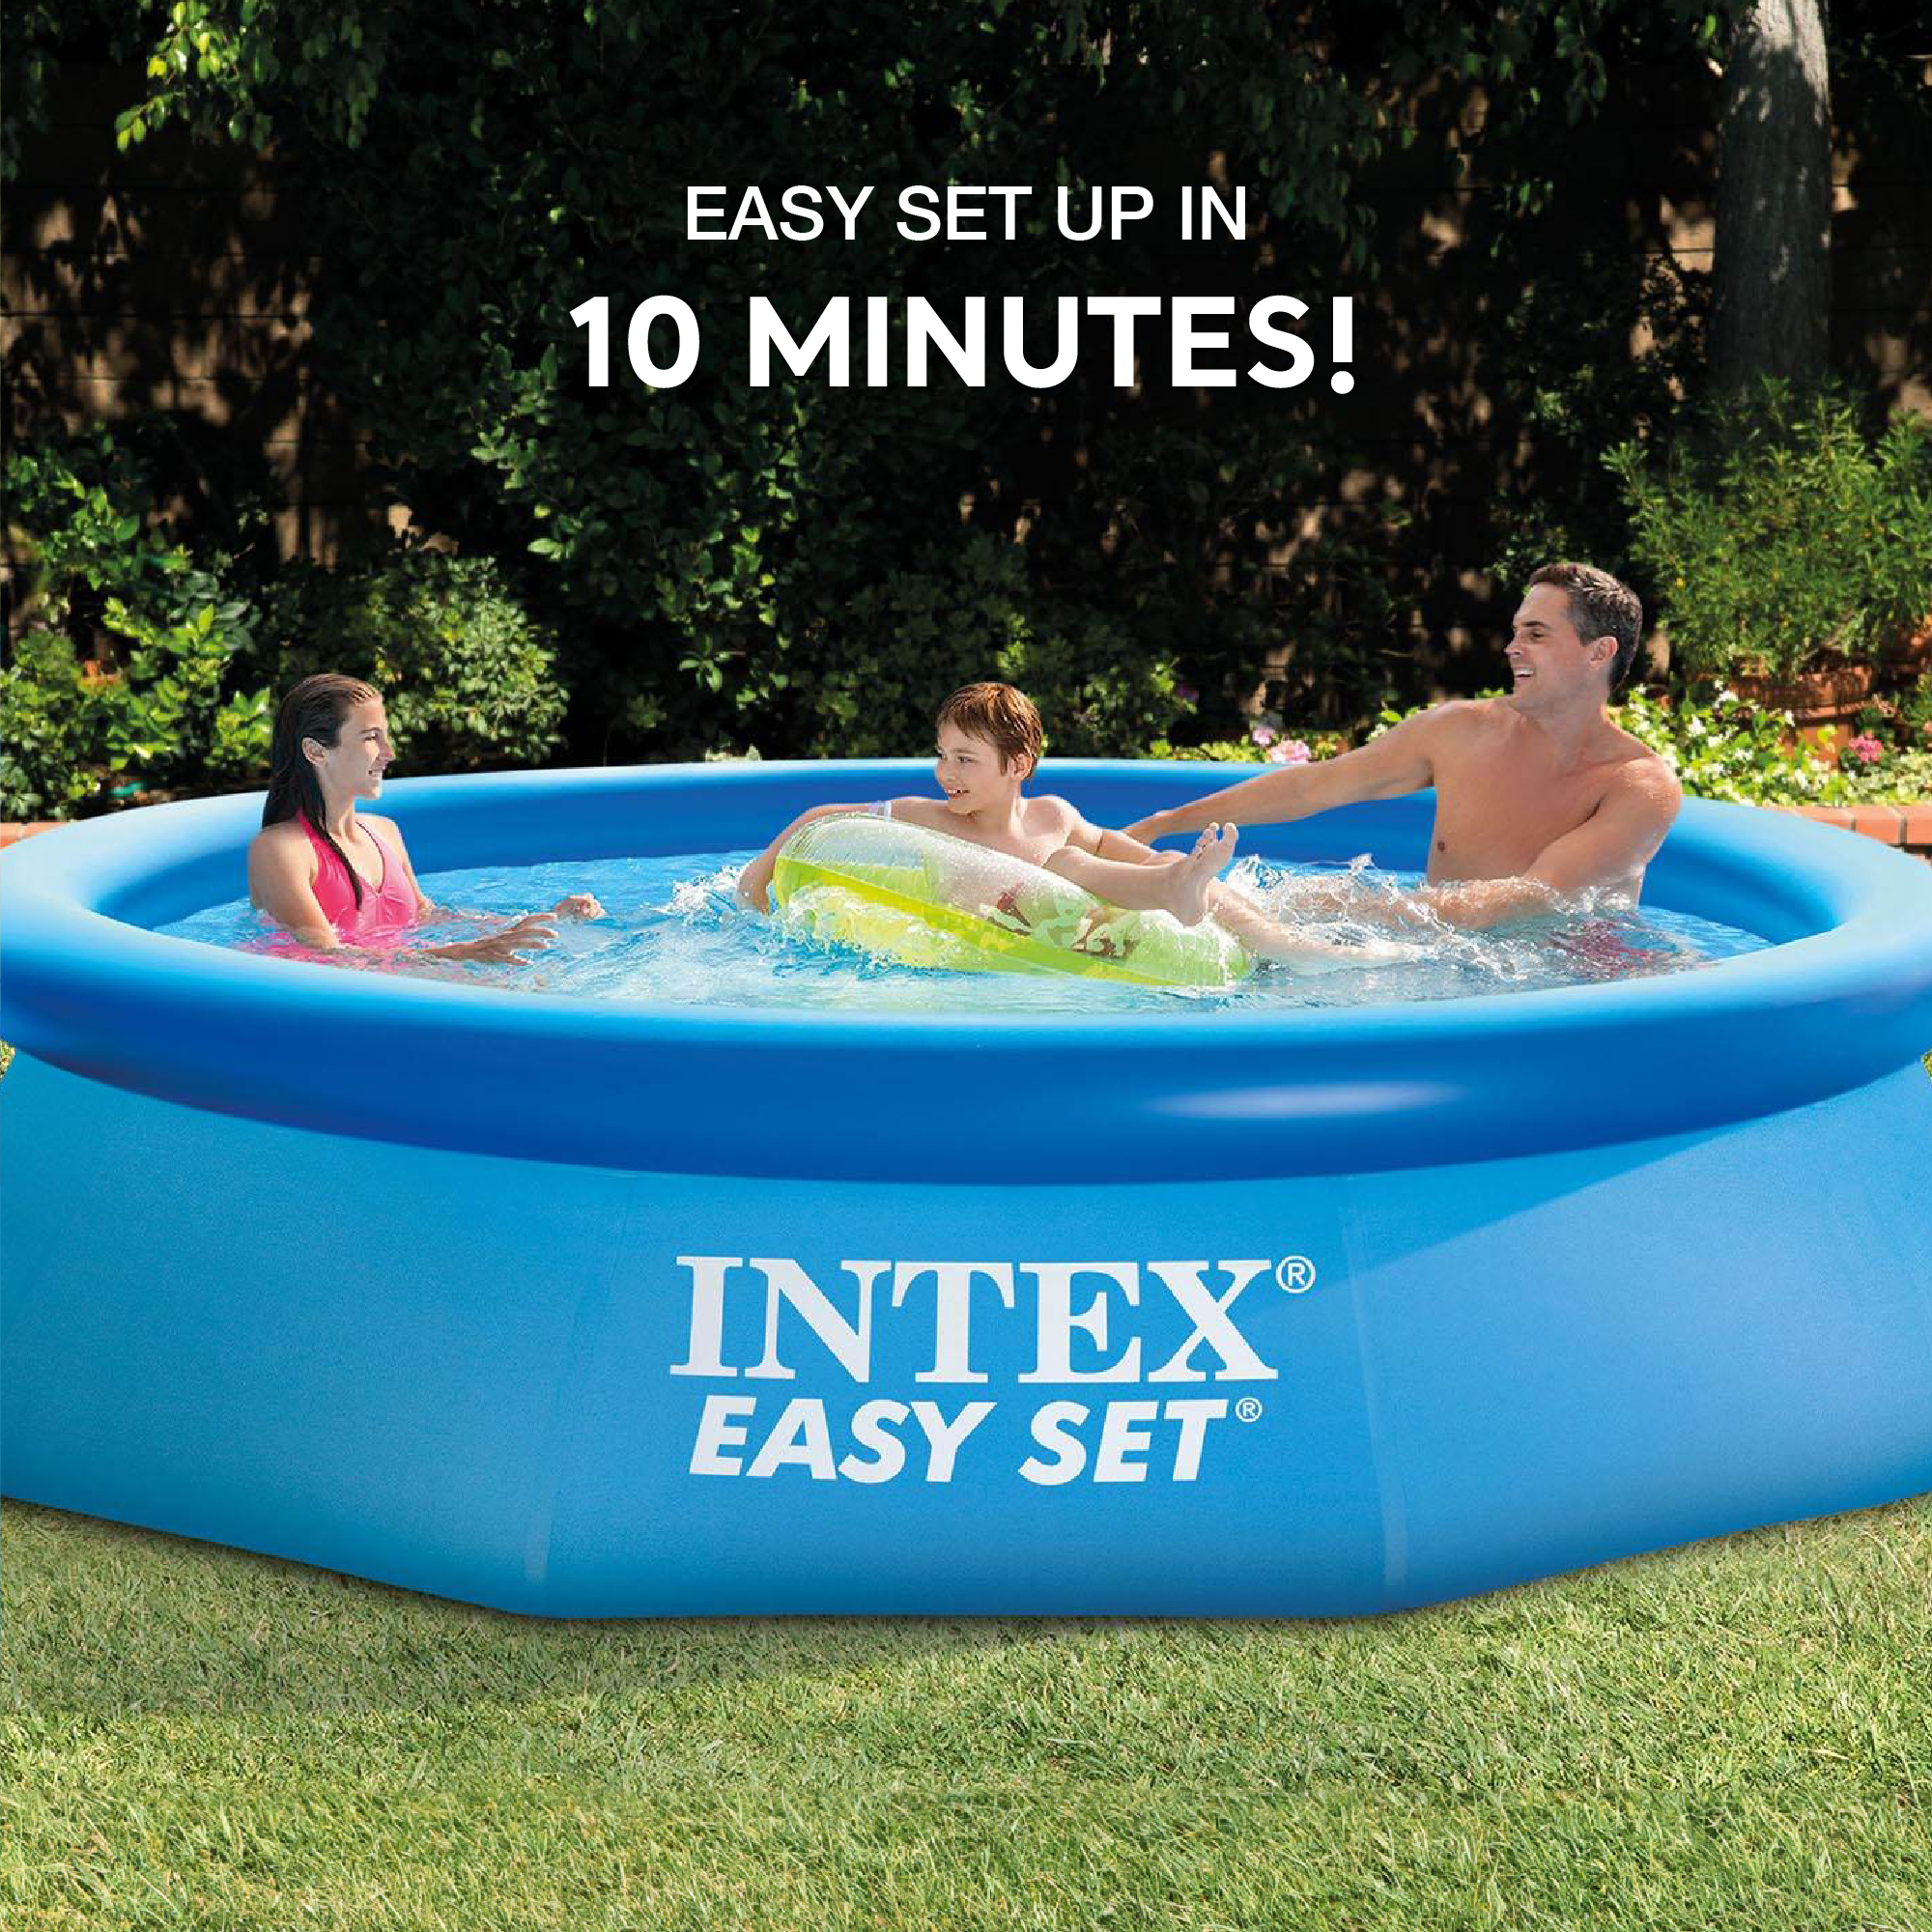 Intex Easy Set 10 Ft x 30 In Above Ground Inflatable Round Swimming Pool - image 3 of 9